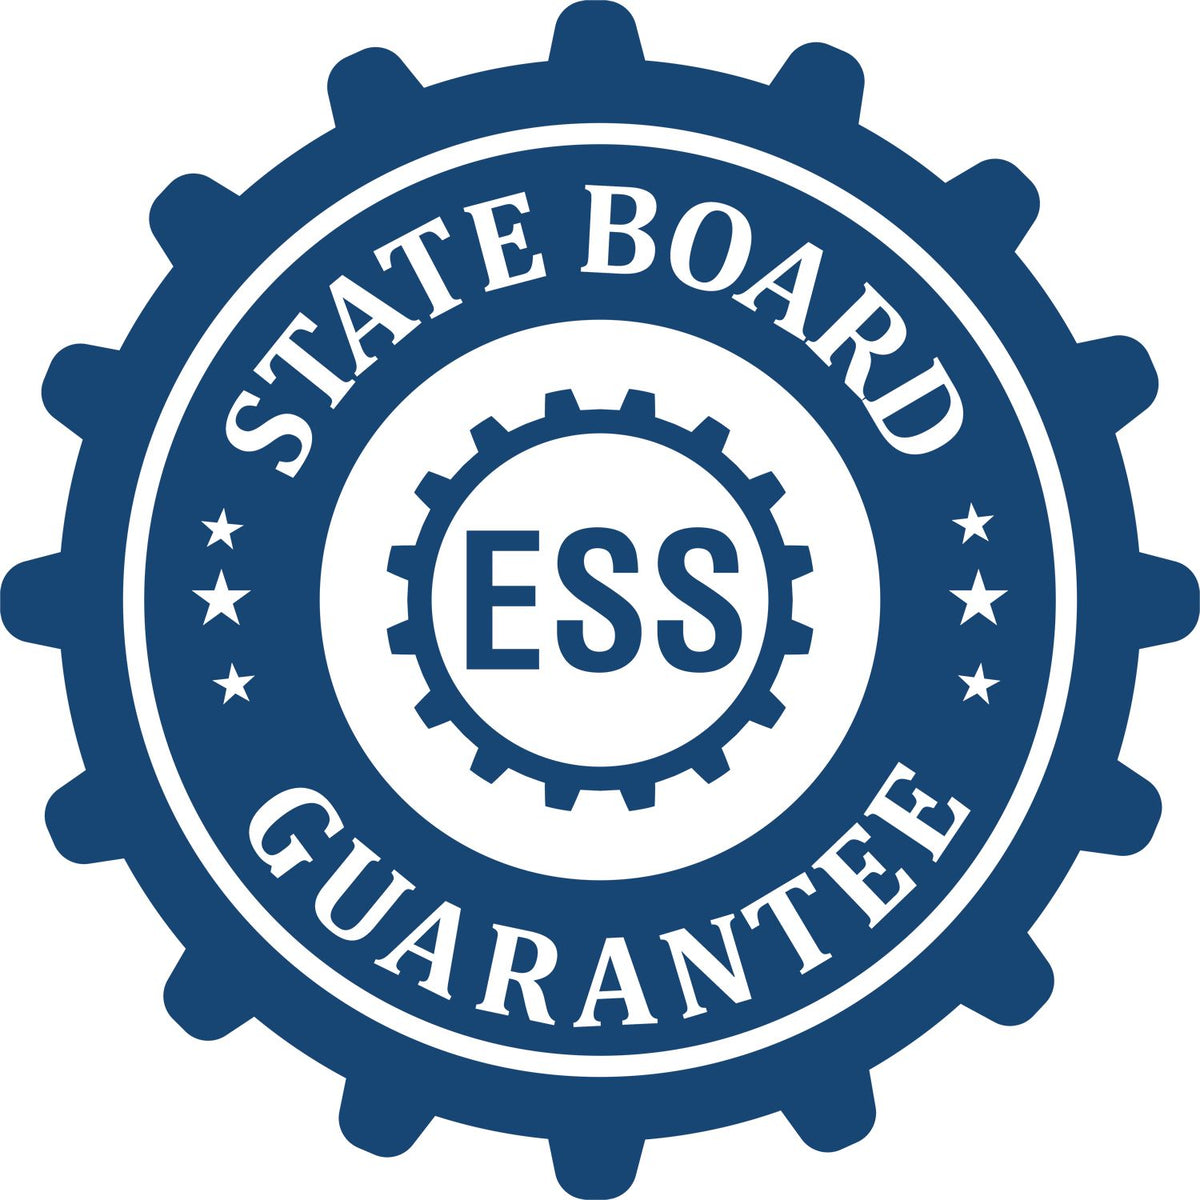 An emblem in a gear shape illustrating a state board guarantee for the Hybrid Kansas Architect Seal